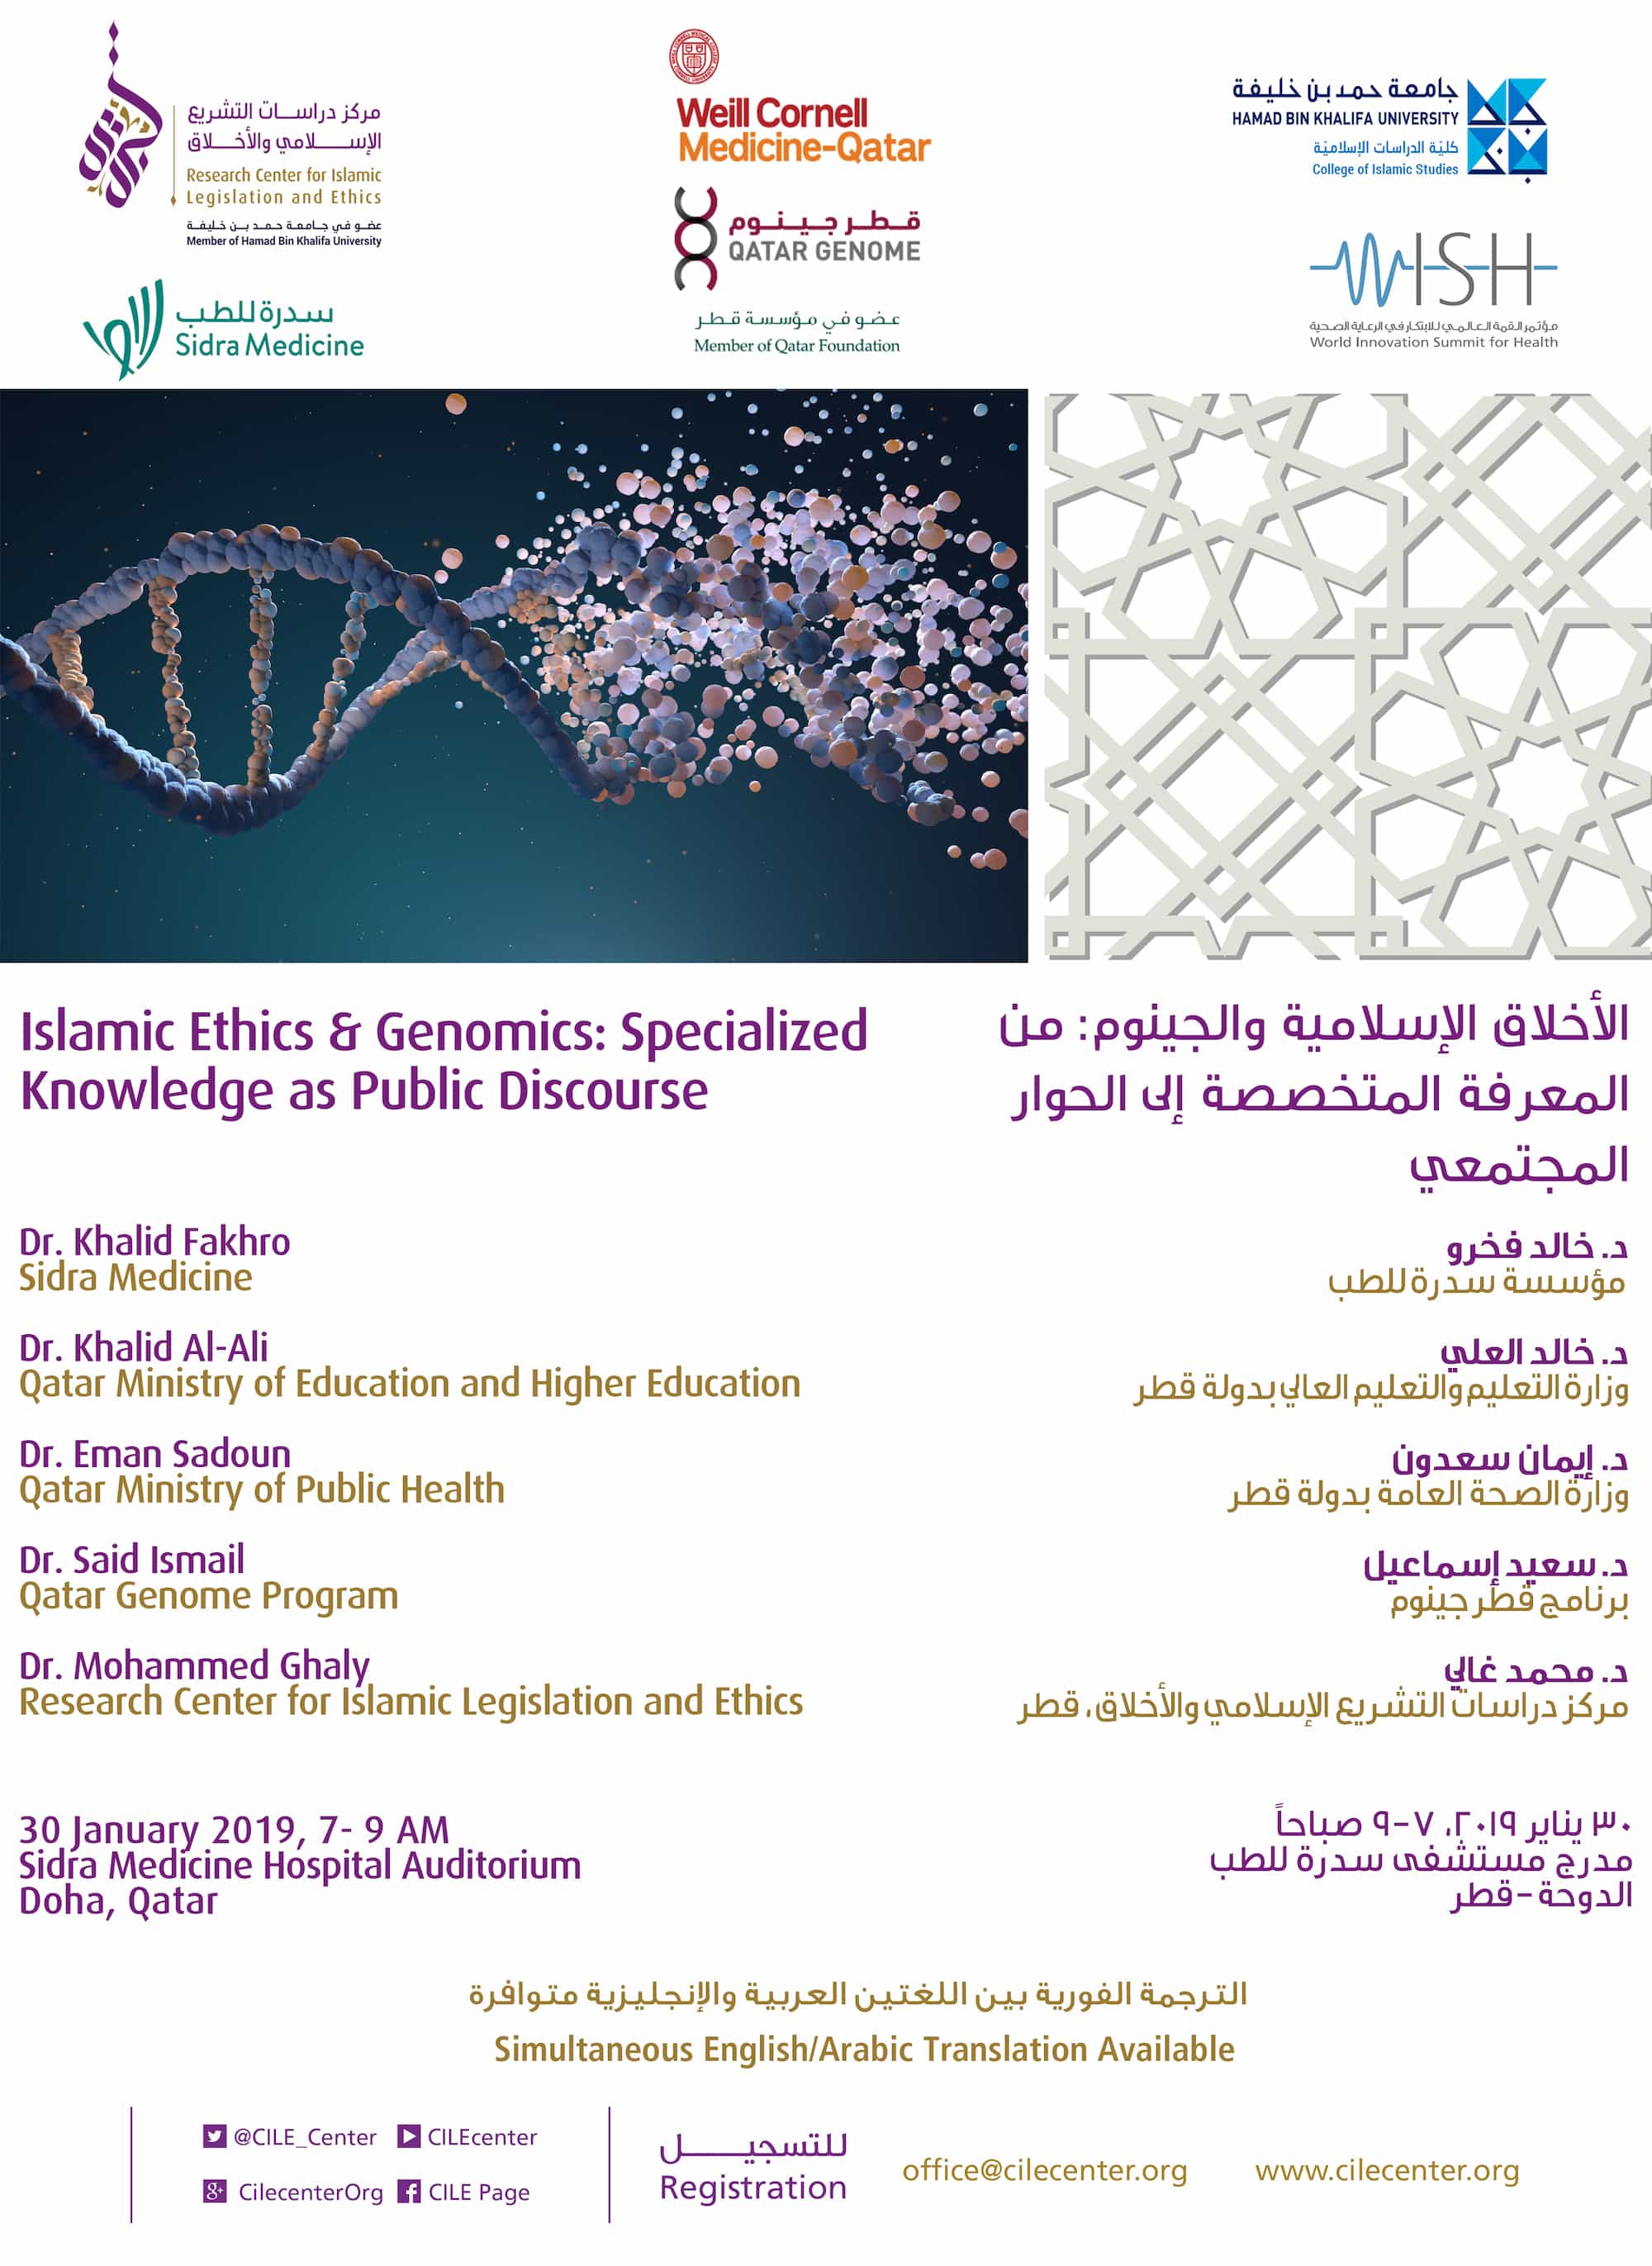 Islamic Ethics & Genomics: Specialized Knowledge as Public Discourse